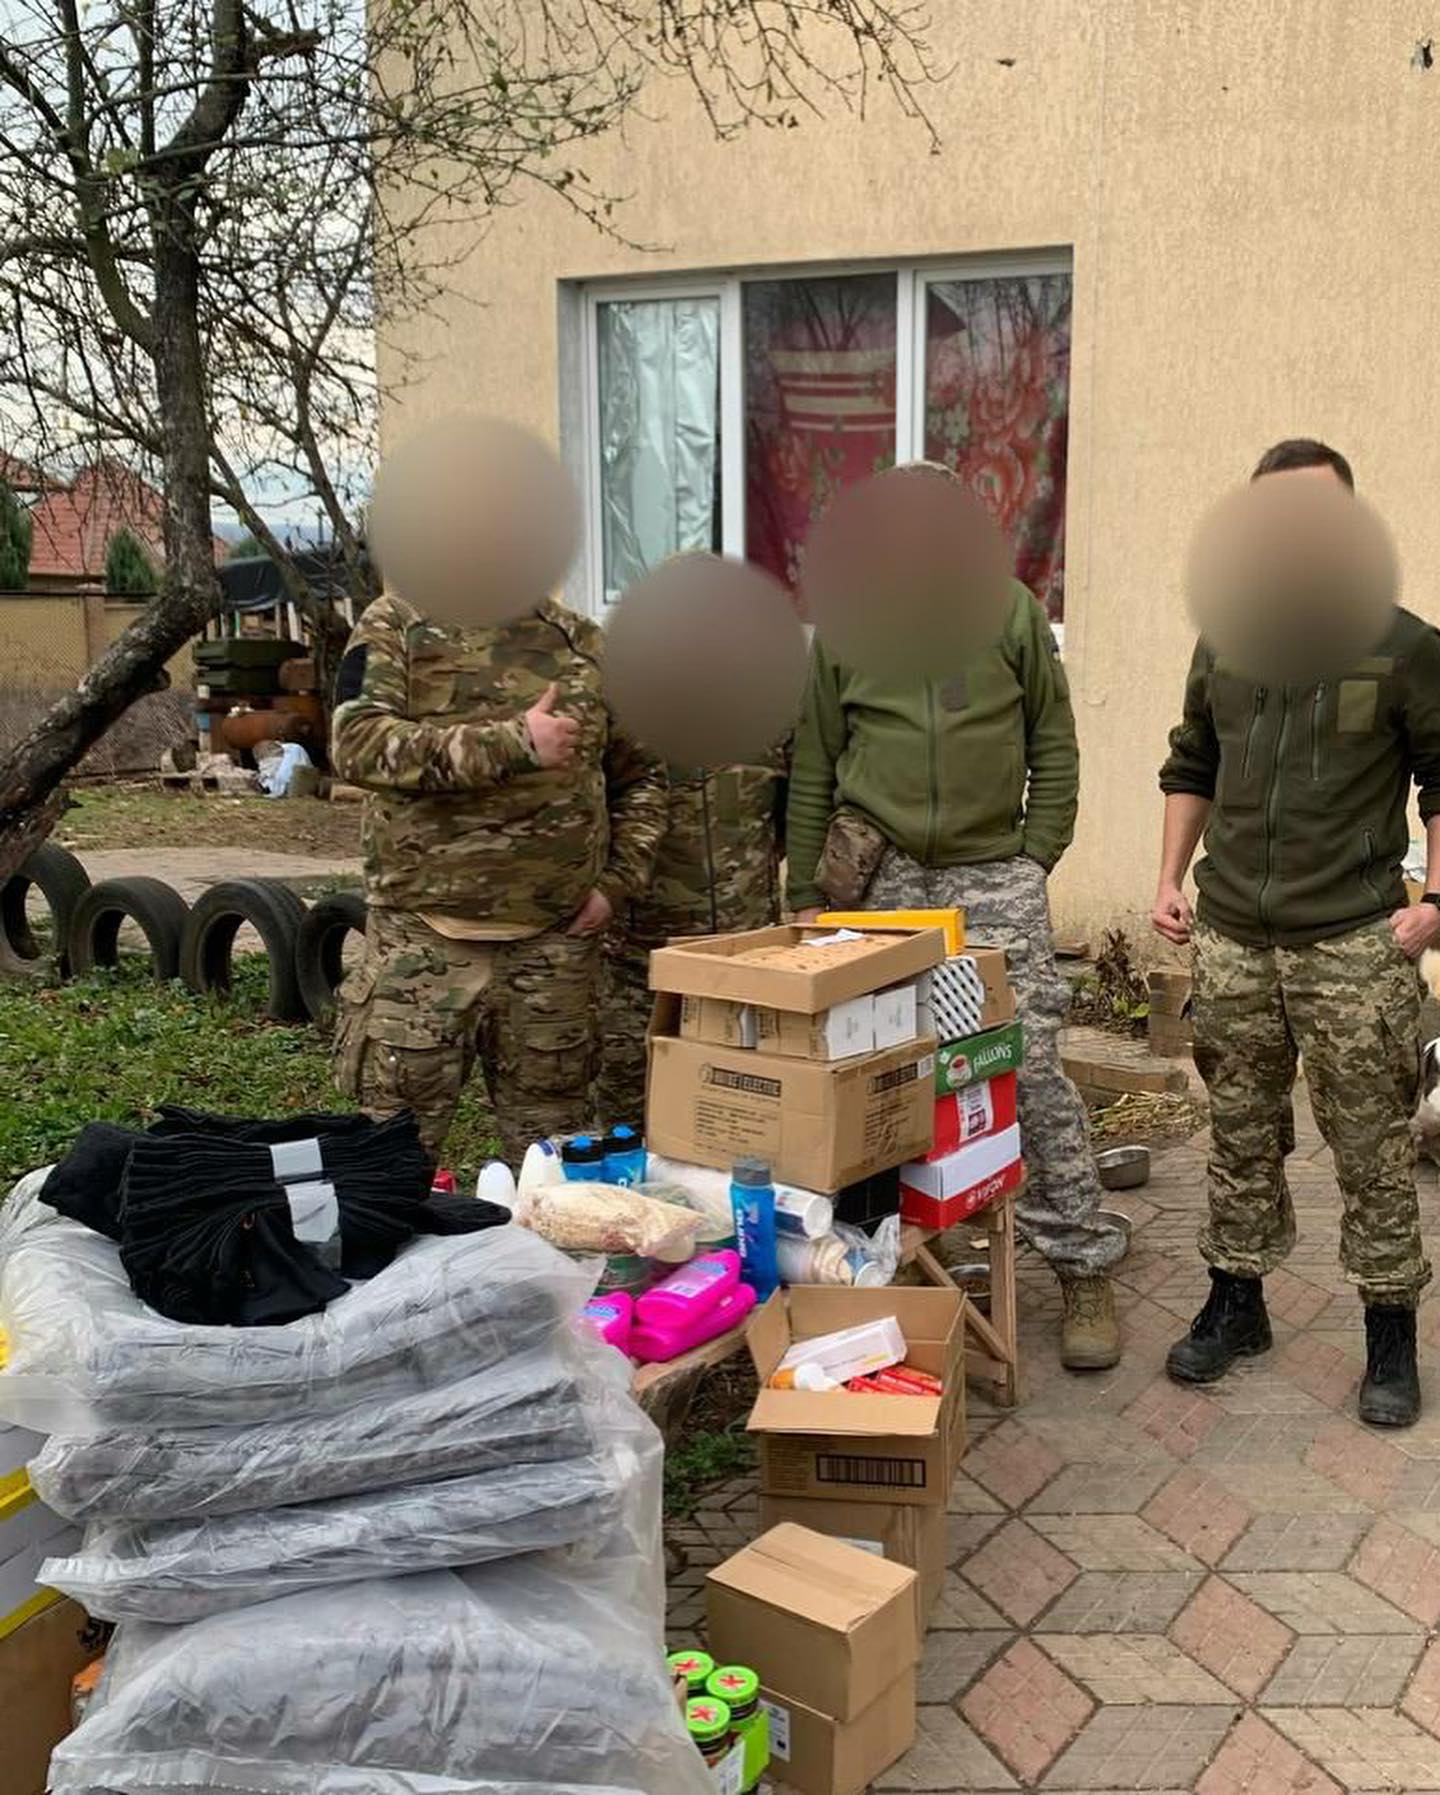 A group of soldiers standing in front of a house with boxes.